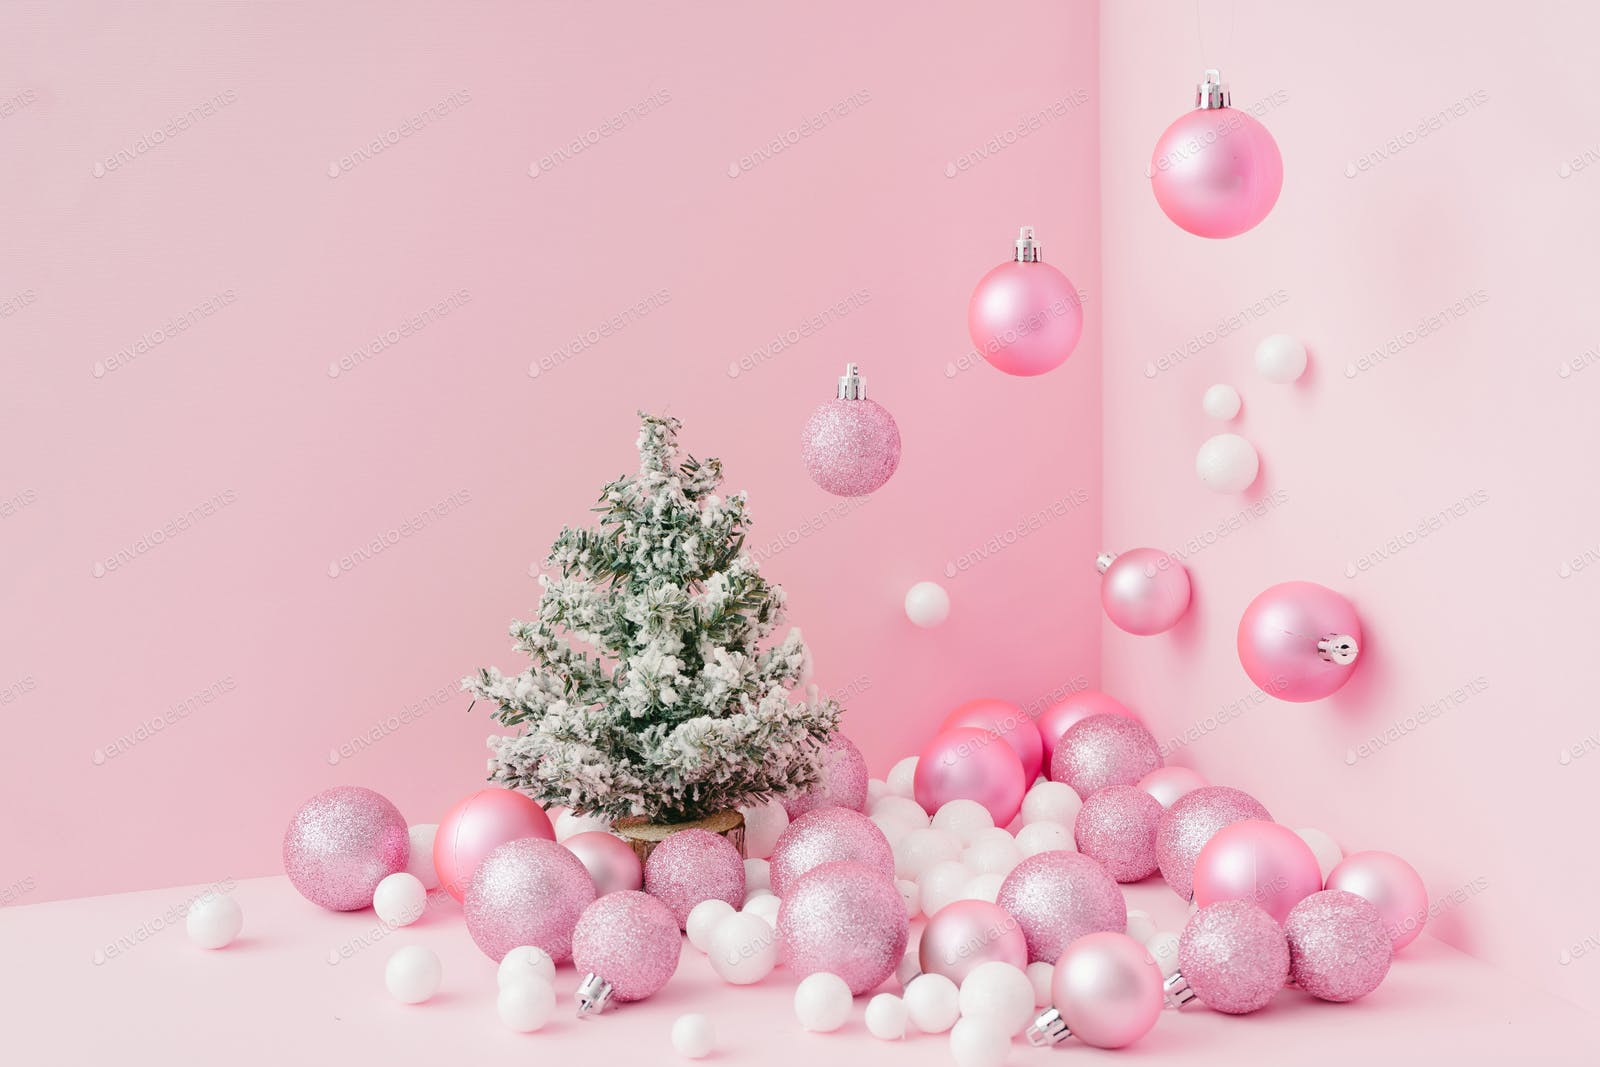 Creative Christmas design pink pastel color background with Christmas tree. New Year concept. photo by zamurovic on Envato Elements